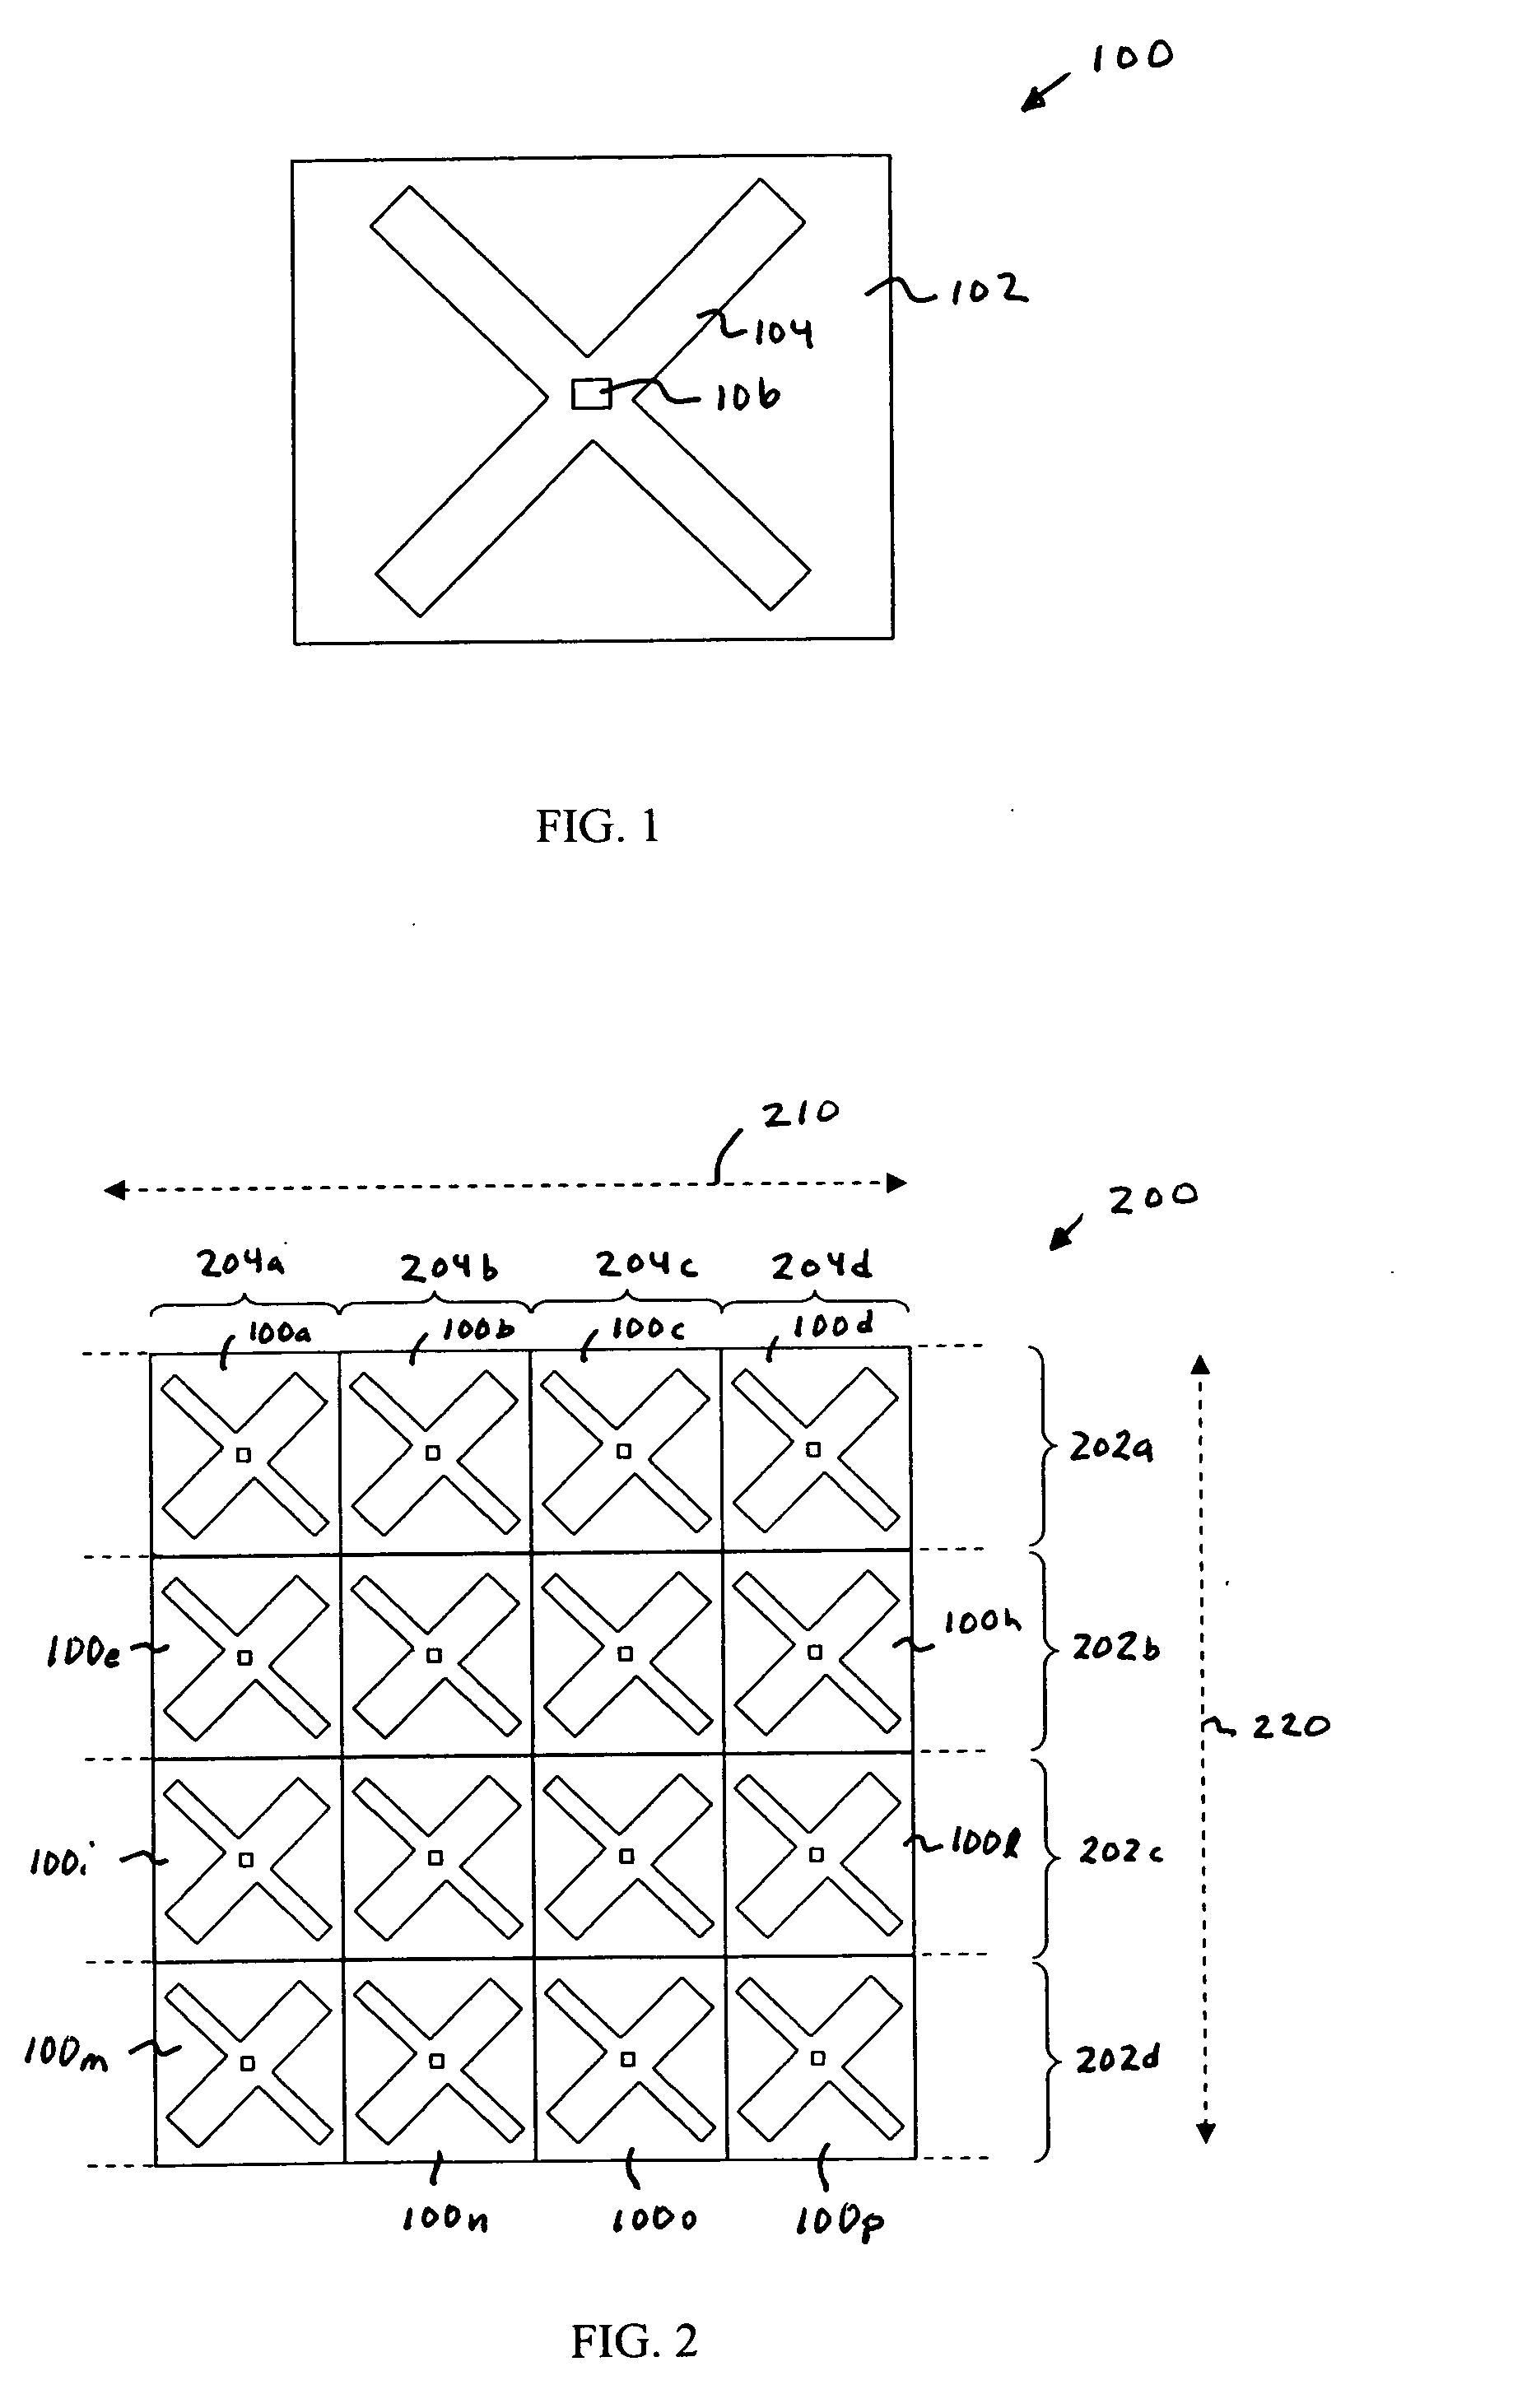 System and method for multi-up inline testing of radio frequency identification (RFID) inlays